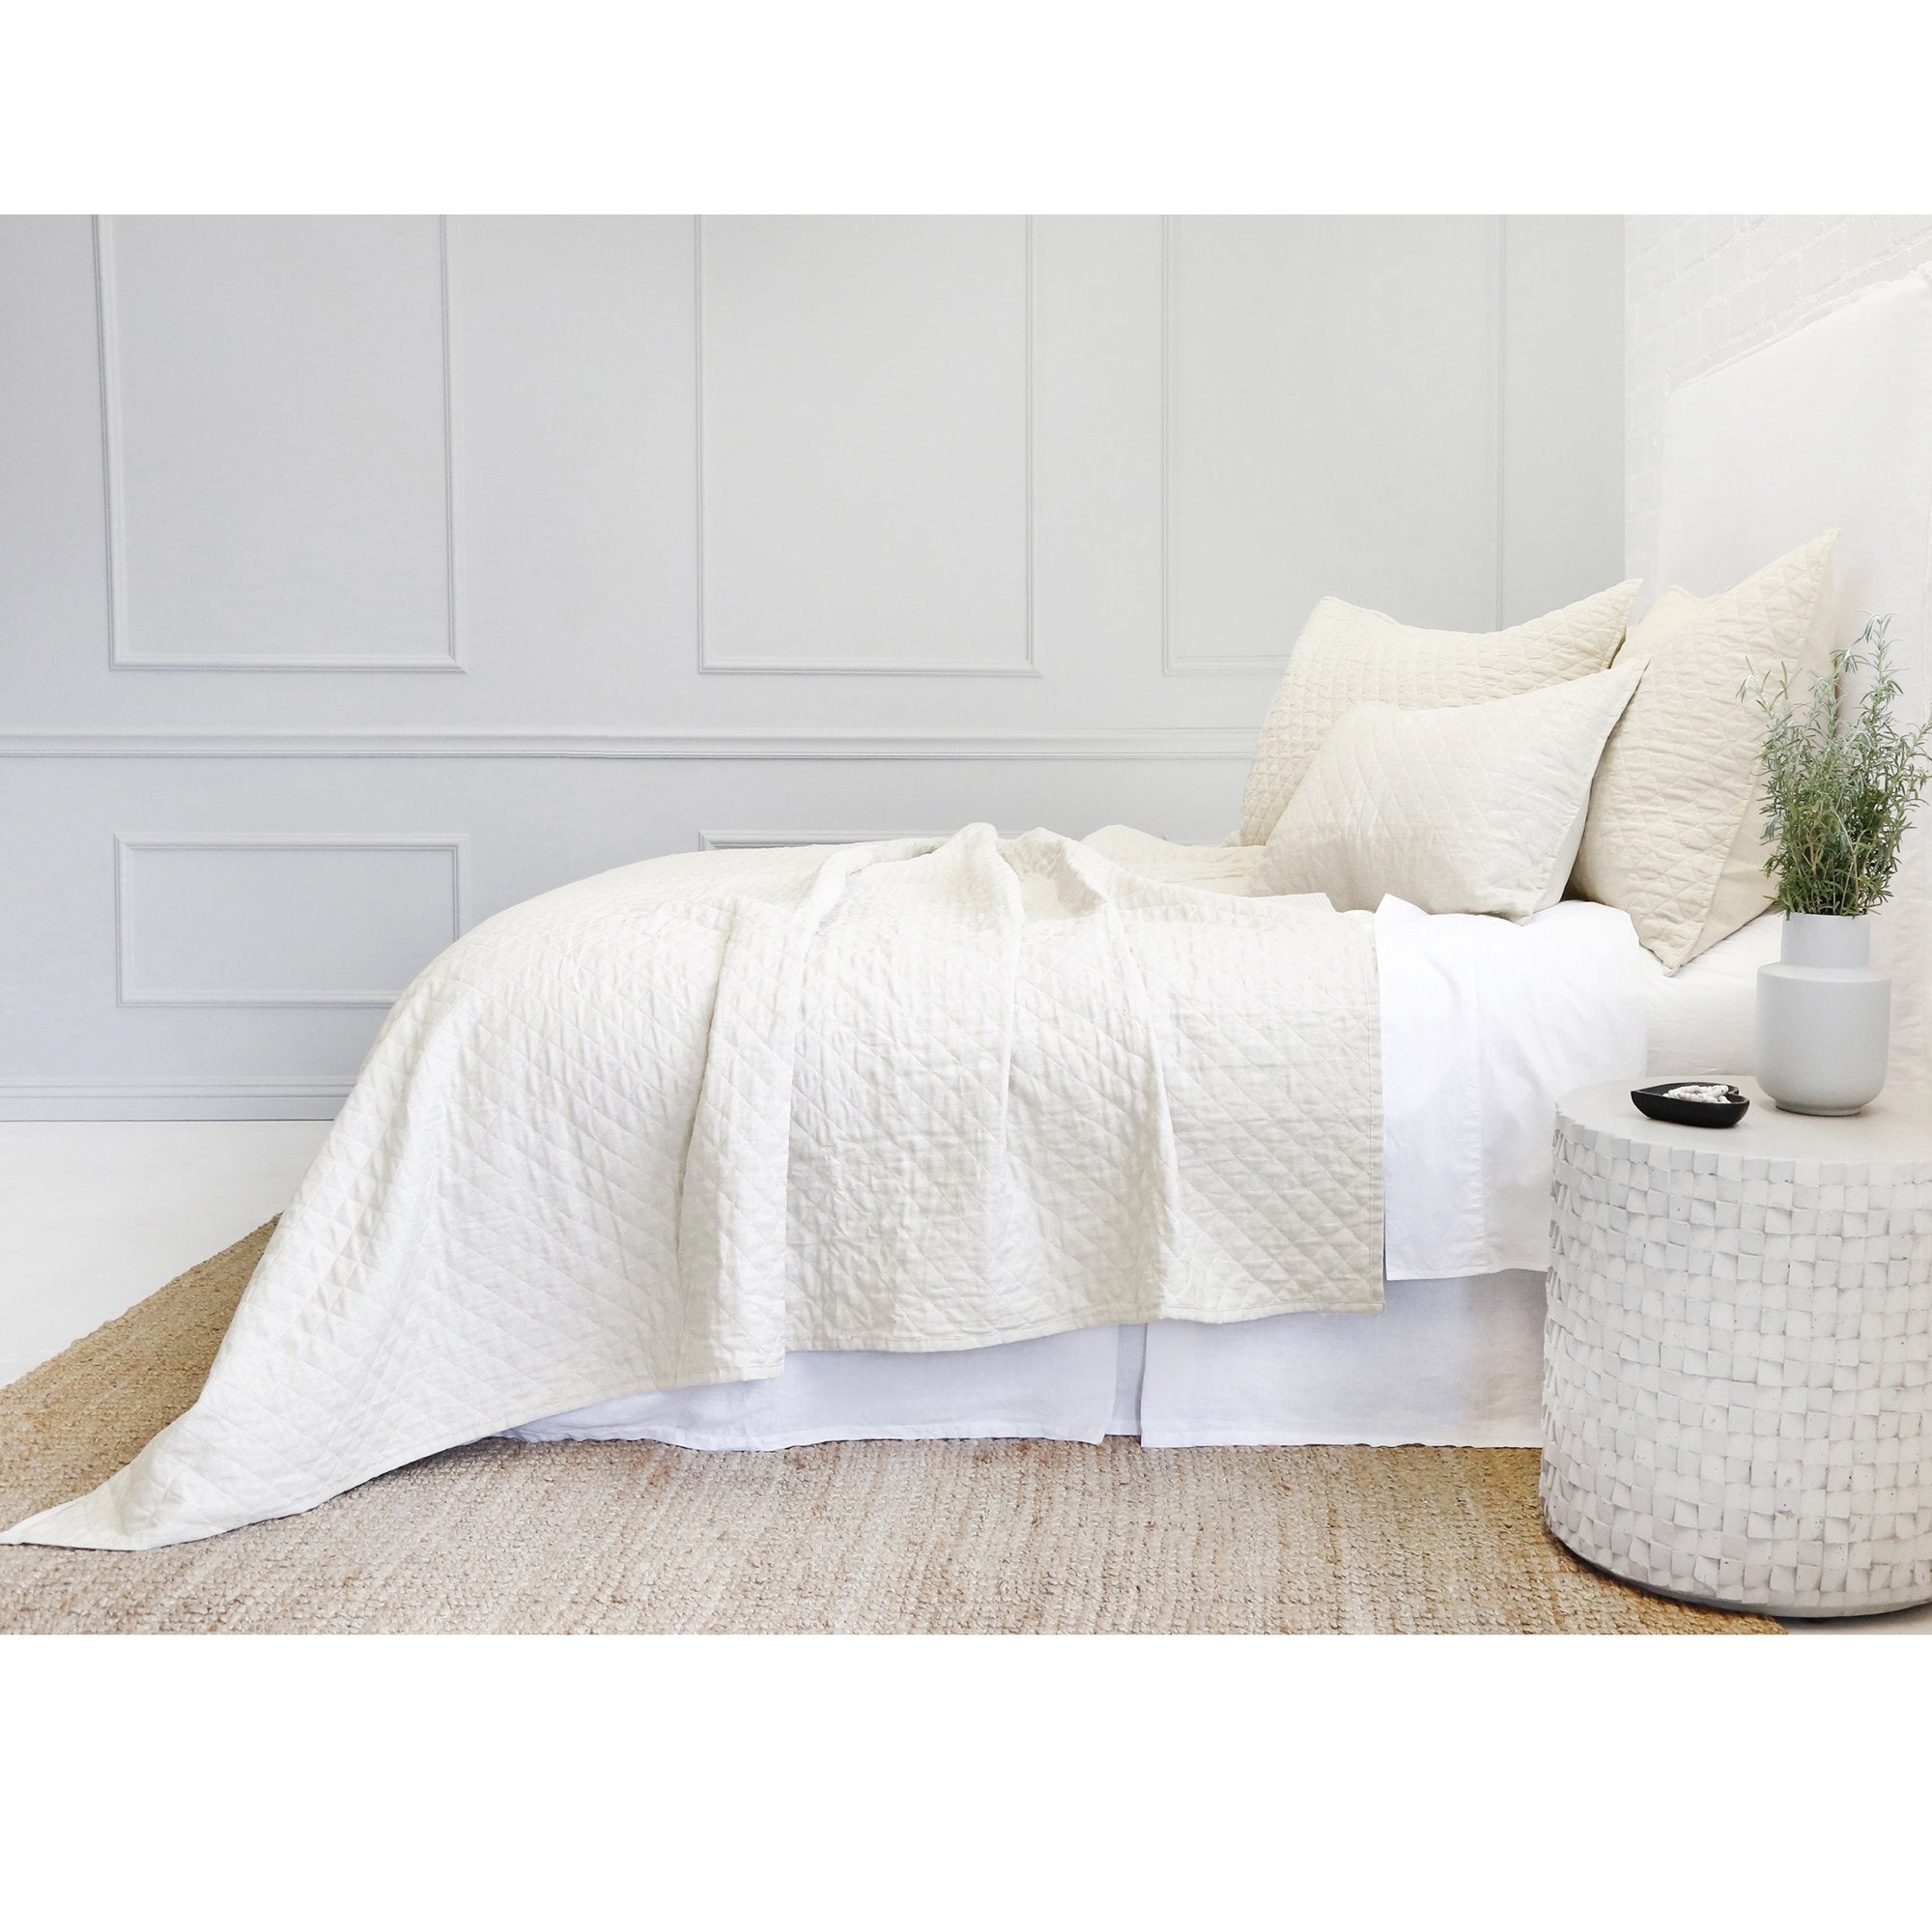 Fig Linens - Pom Pom at Home Hampton Bedding - Cream quilted coverlet